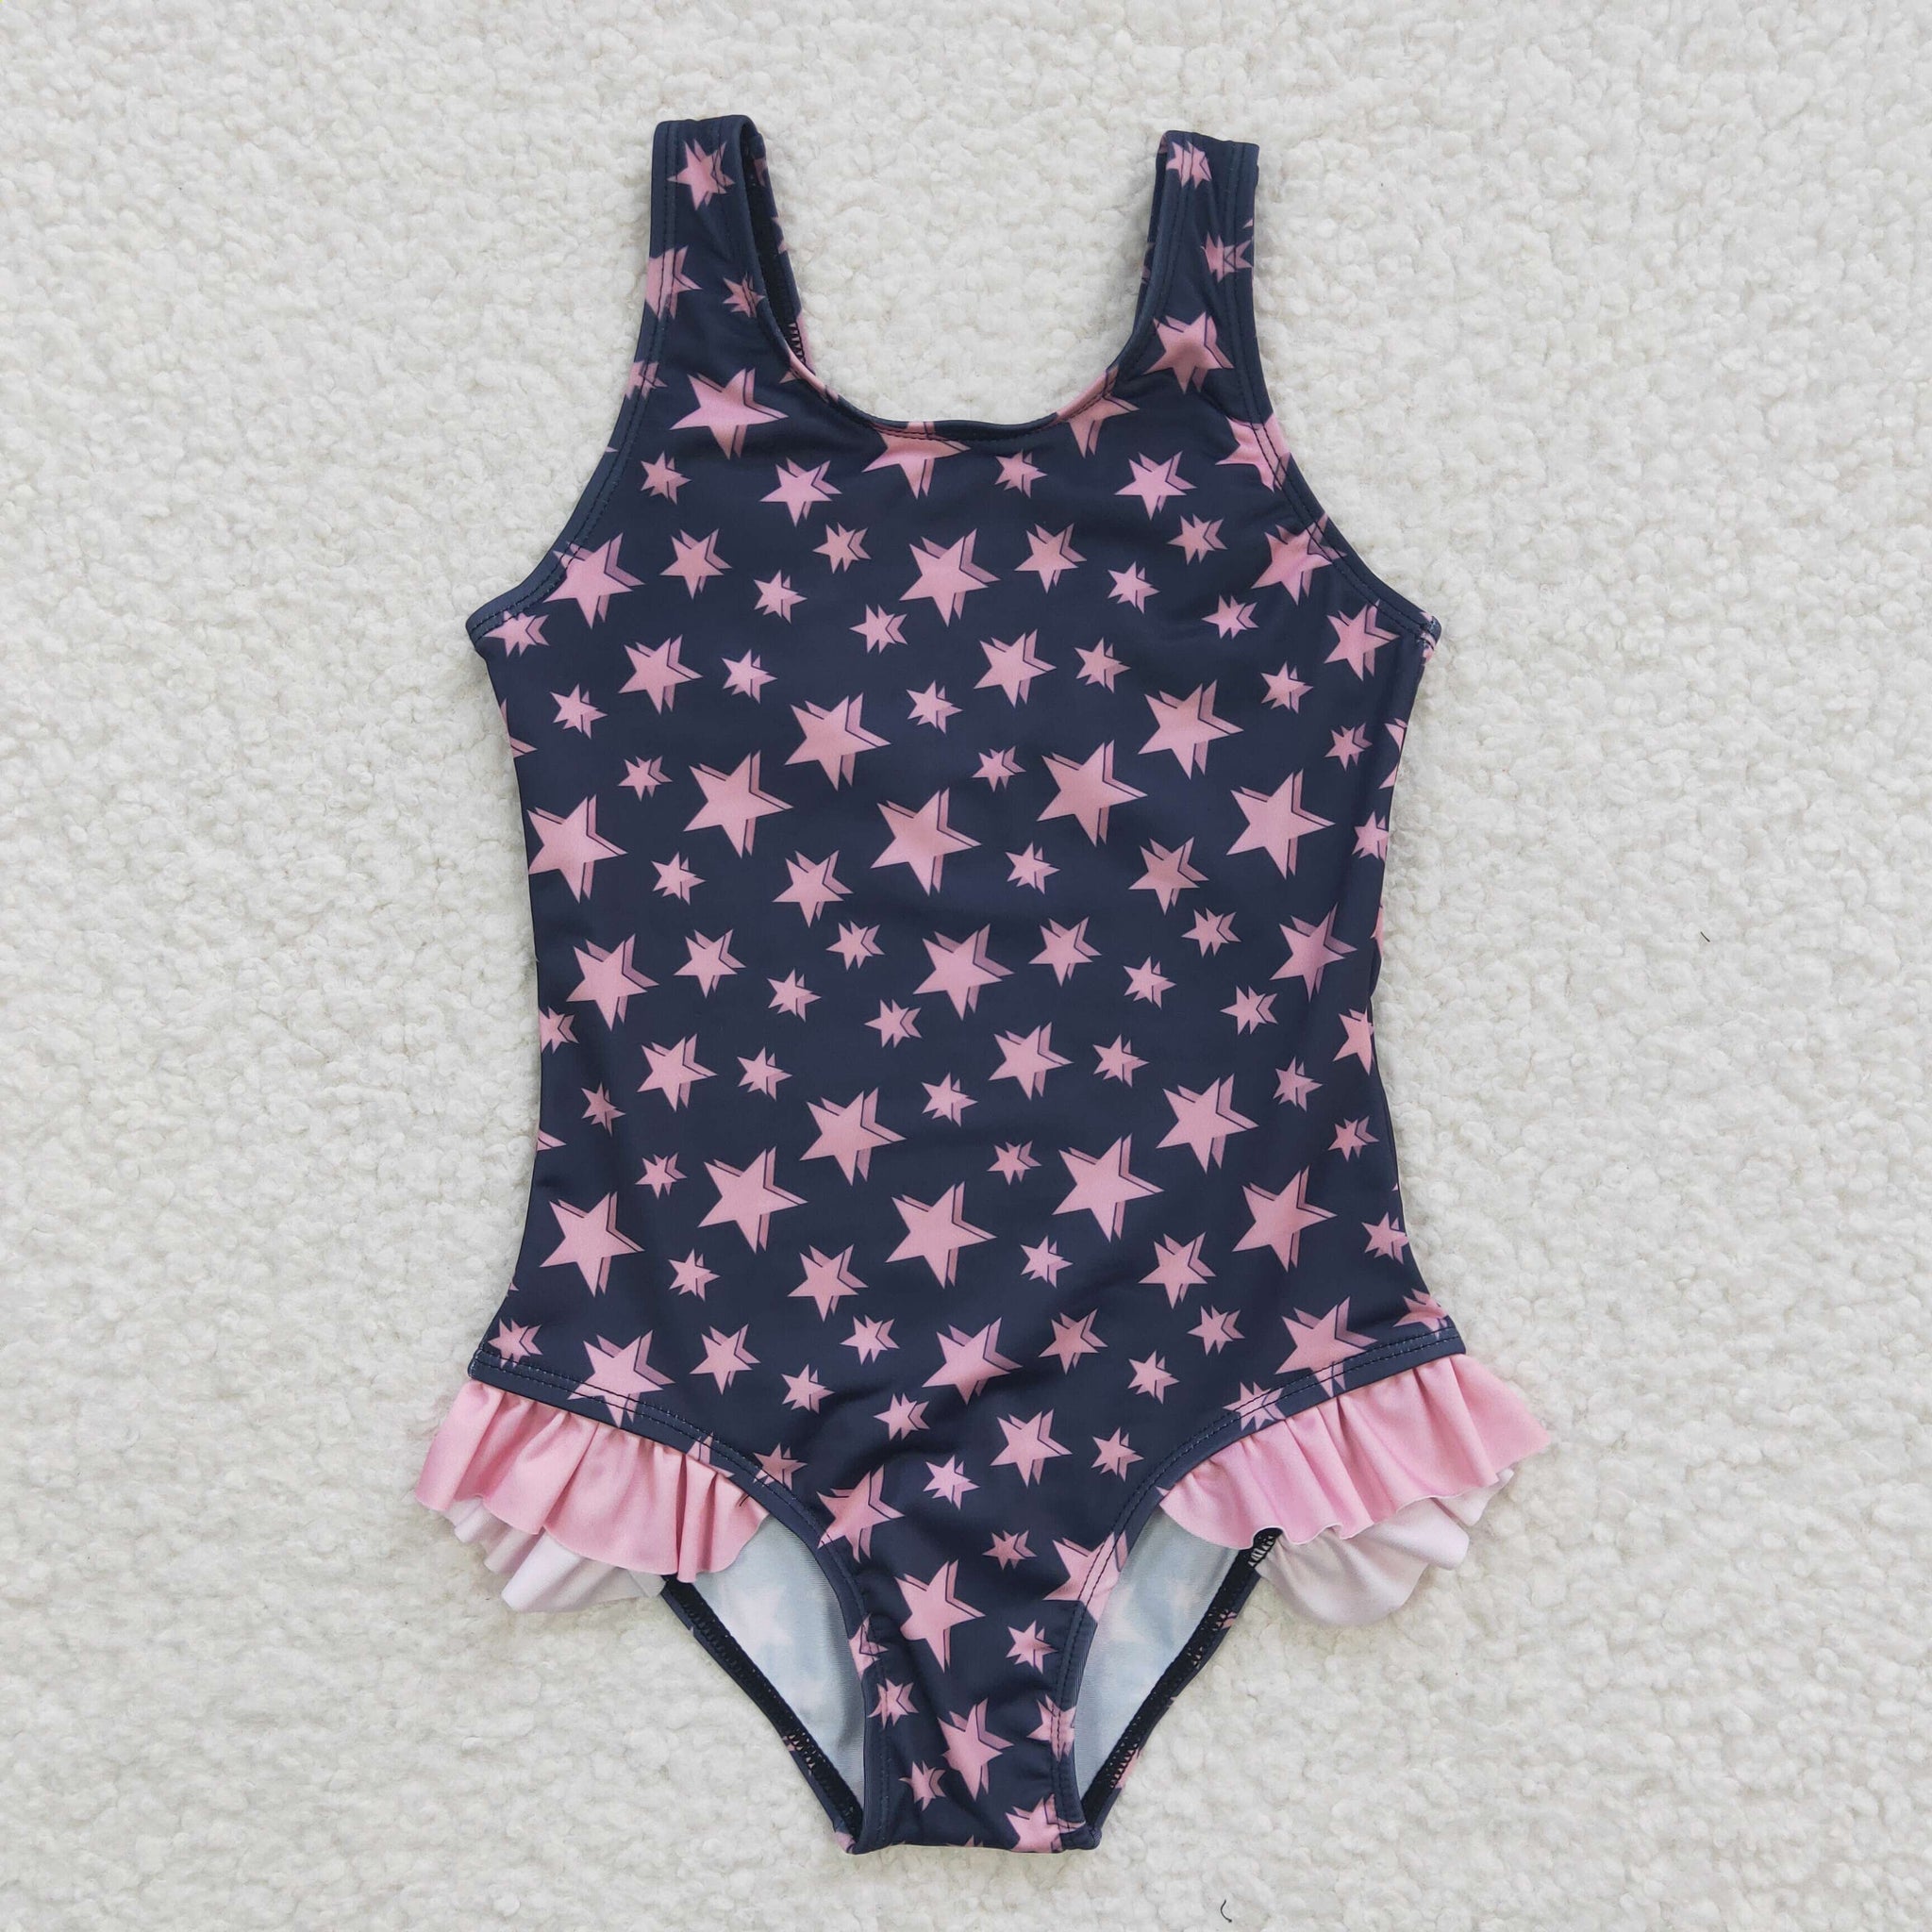 S0048 baby girl clothes july 4th patriotic summer swimsuit